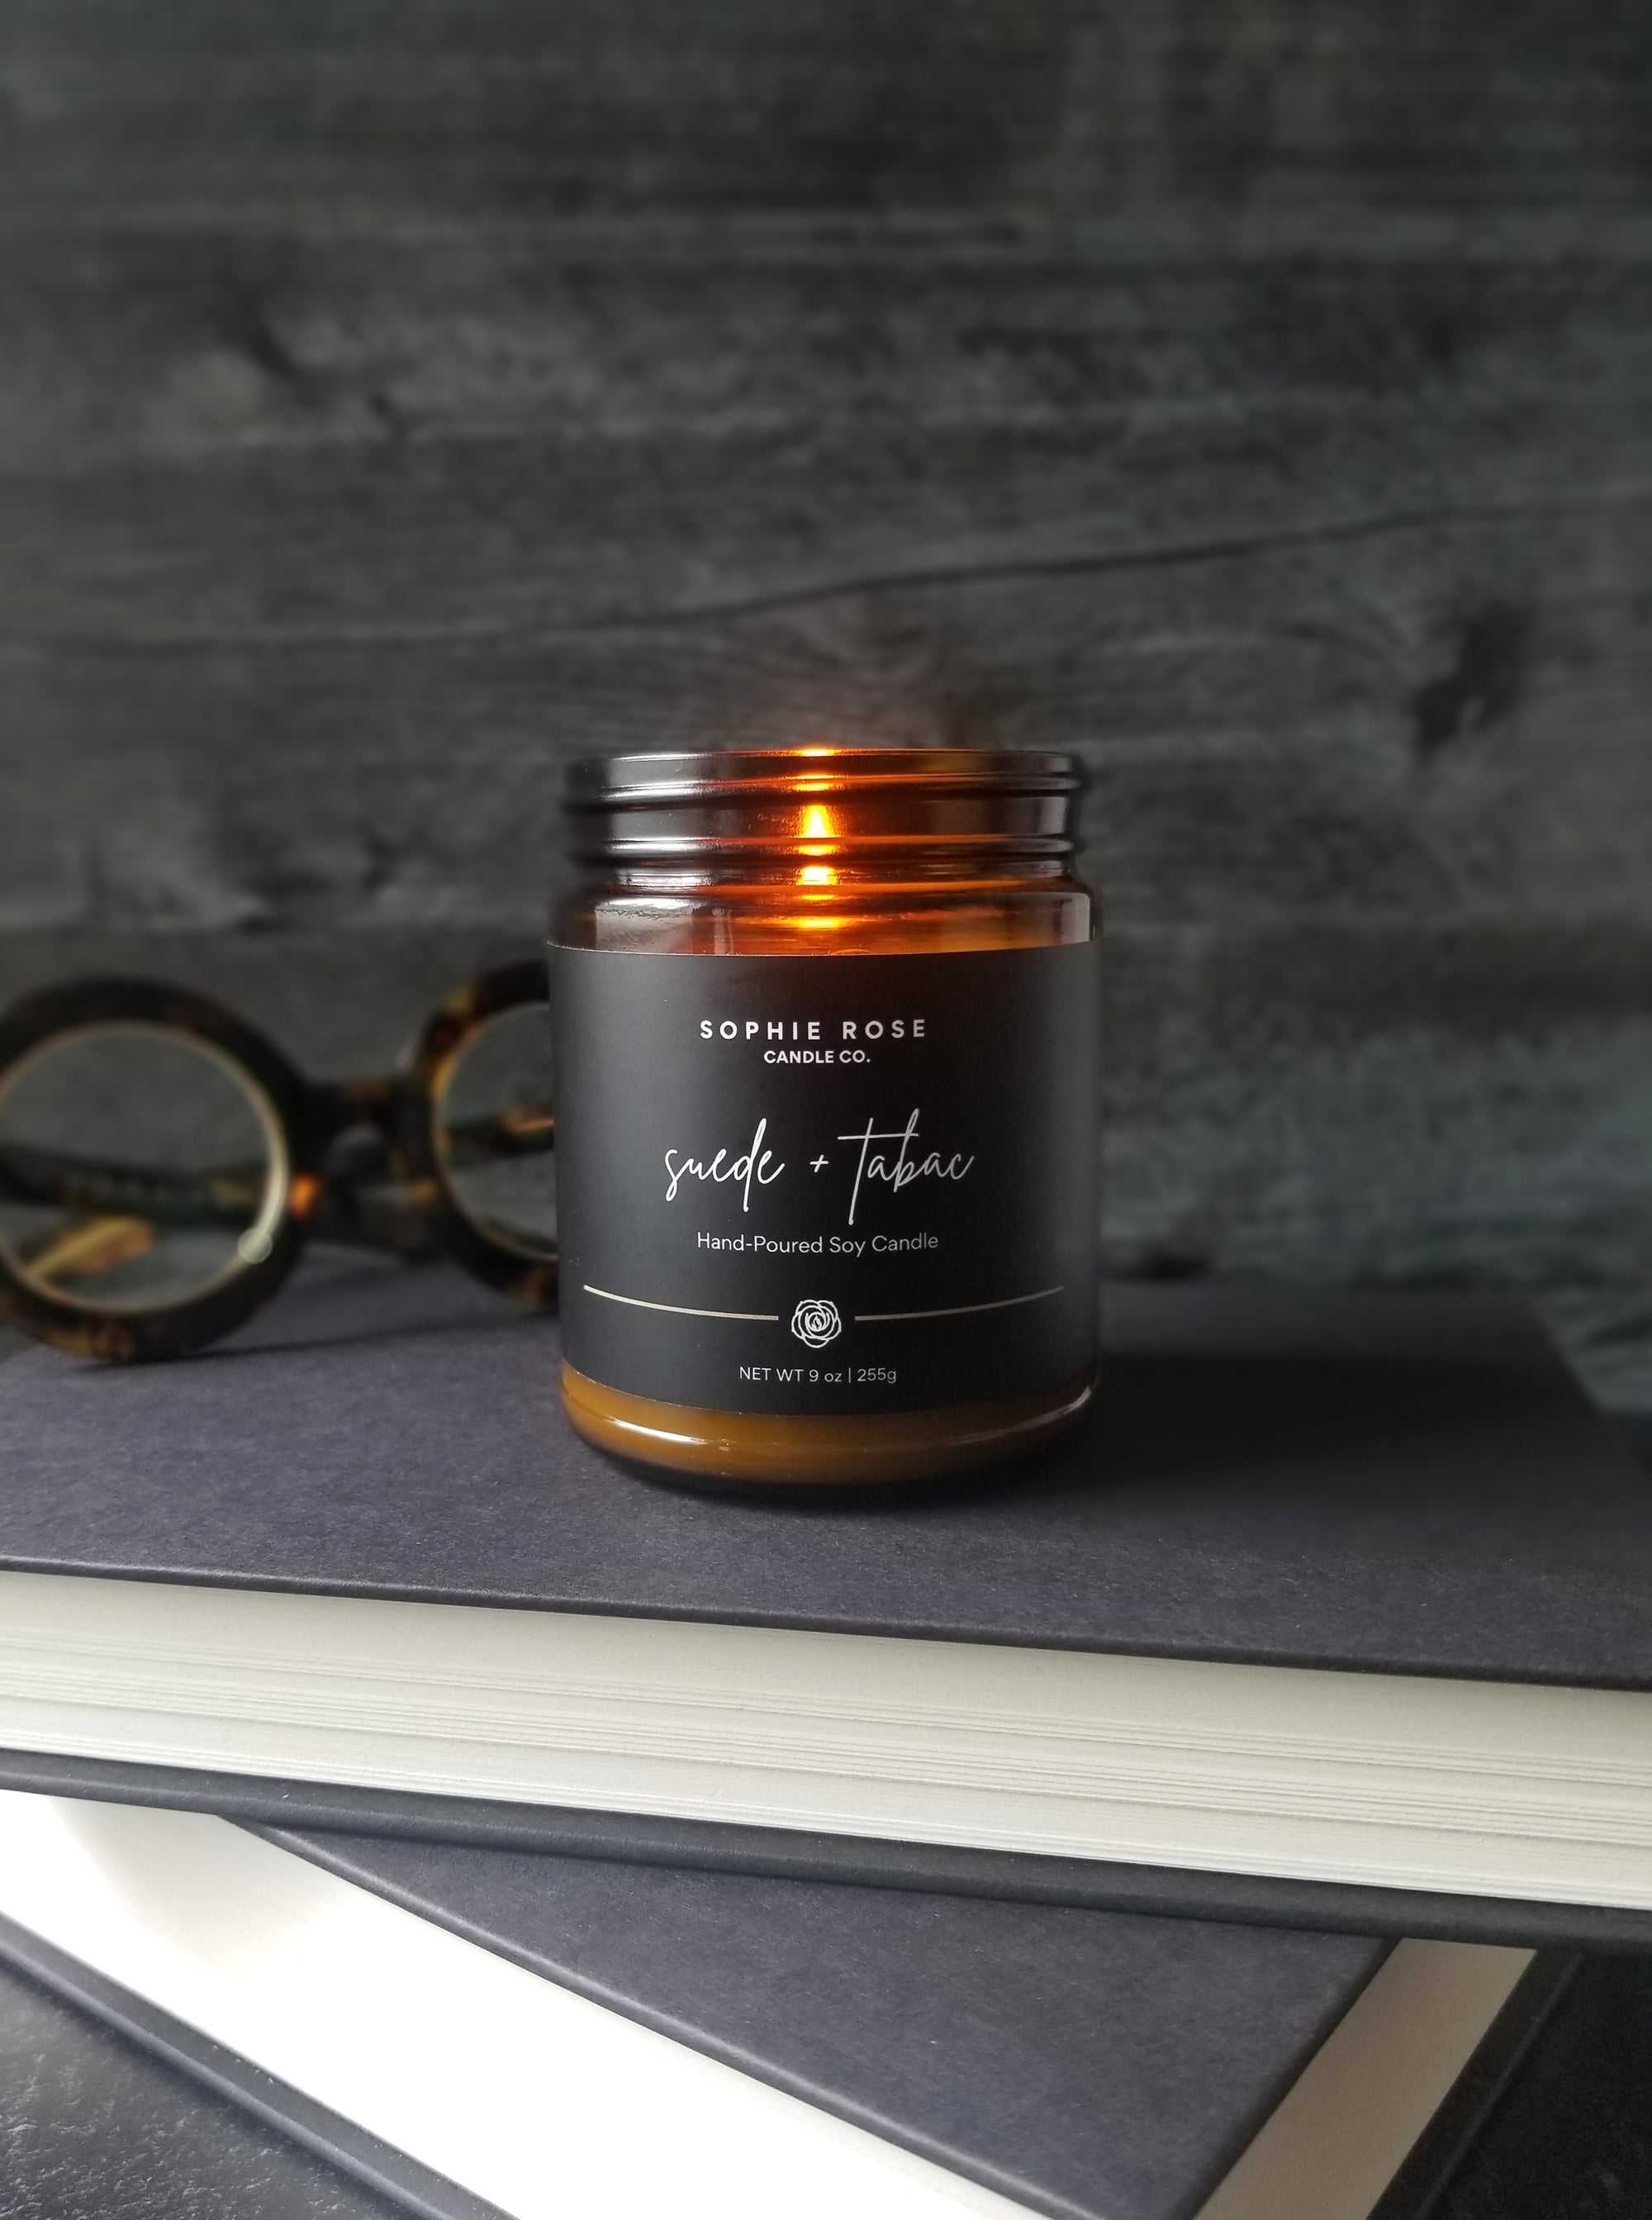 Suede + Tabac by Sophie Rose Candle Co.